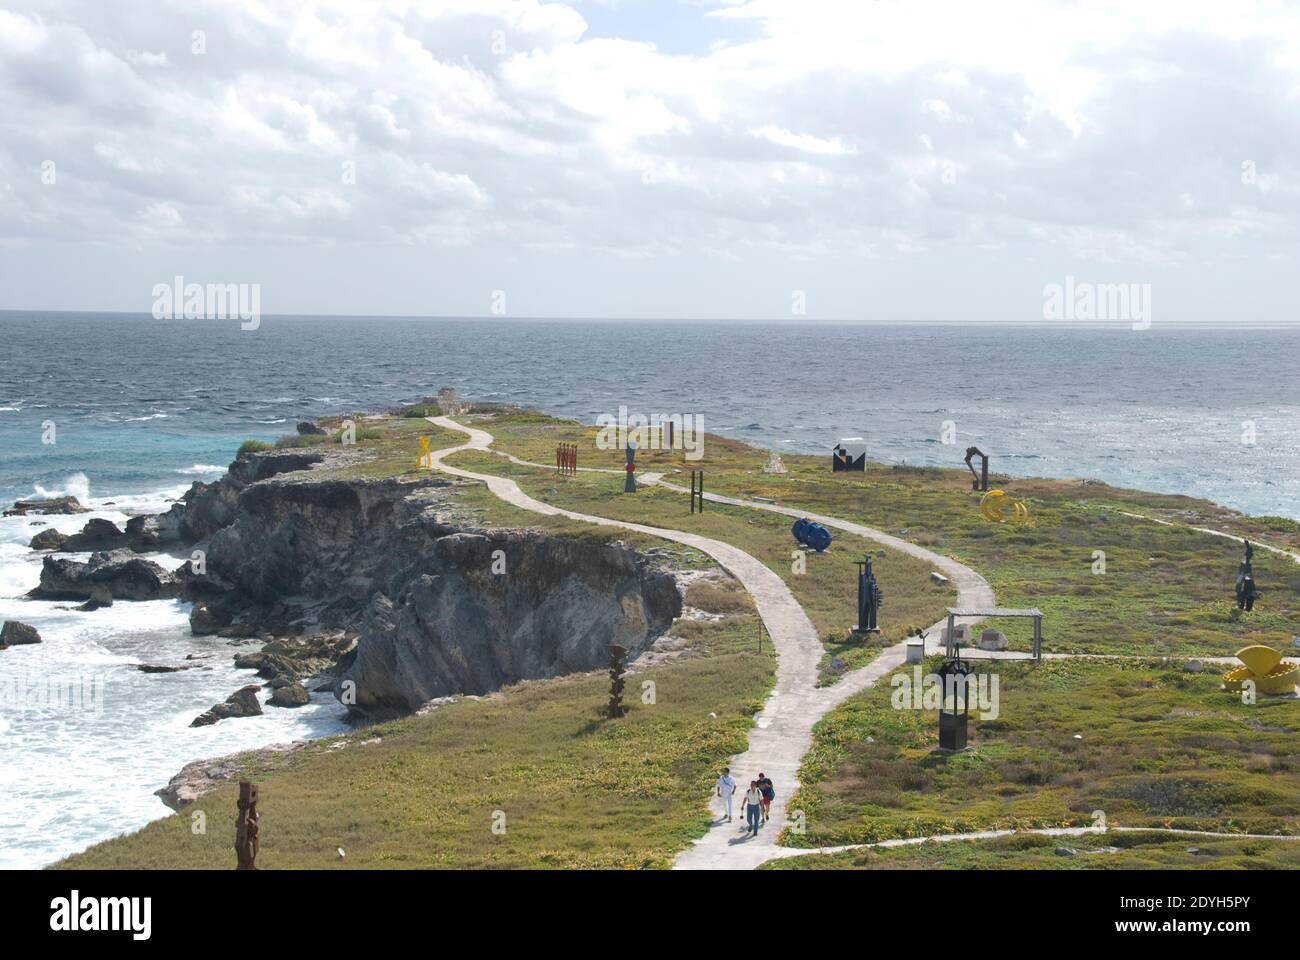 Visitors walk the trails at Punta Sur, a sculpture garden at the southern tip of Isla Mujeres, Quintana Roo, Mexico. Stock Photo